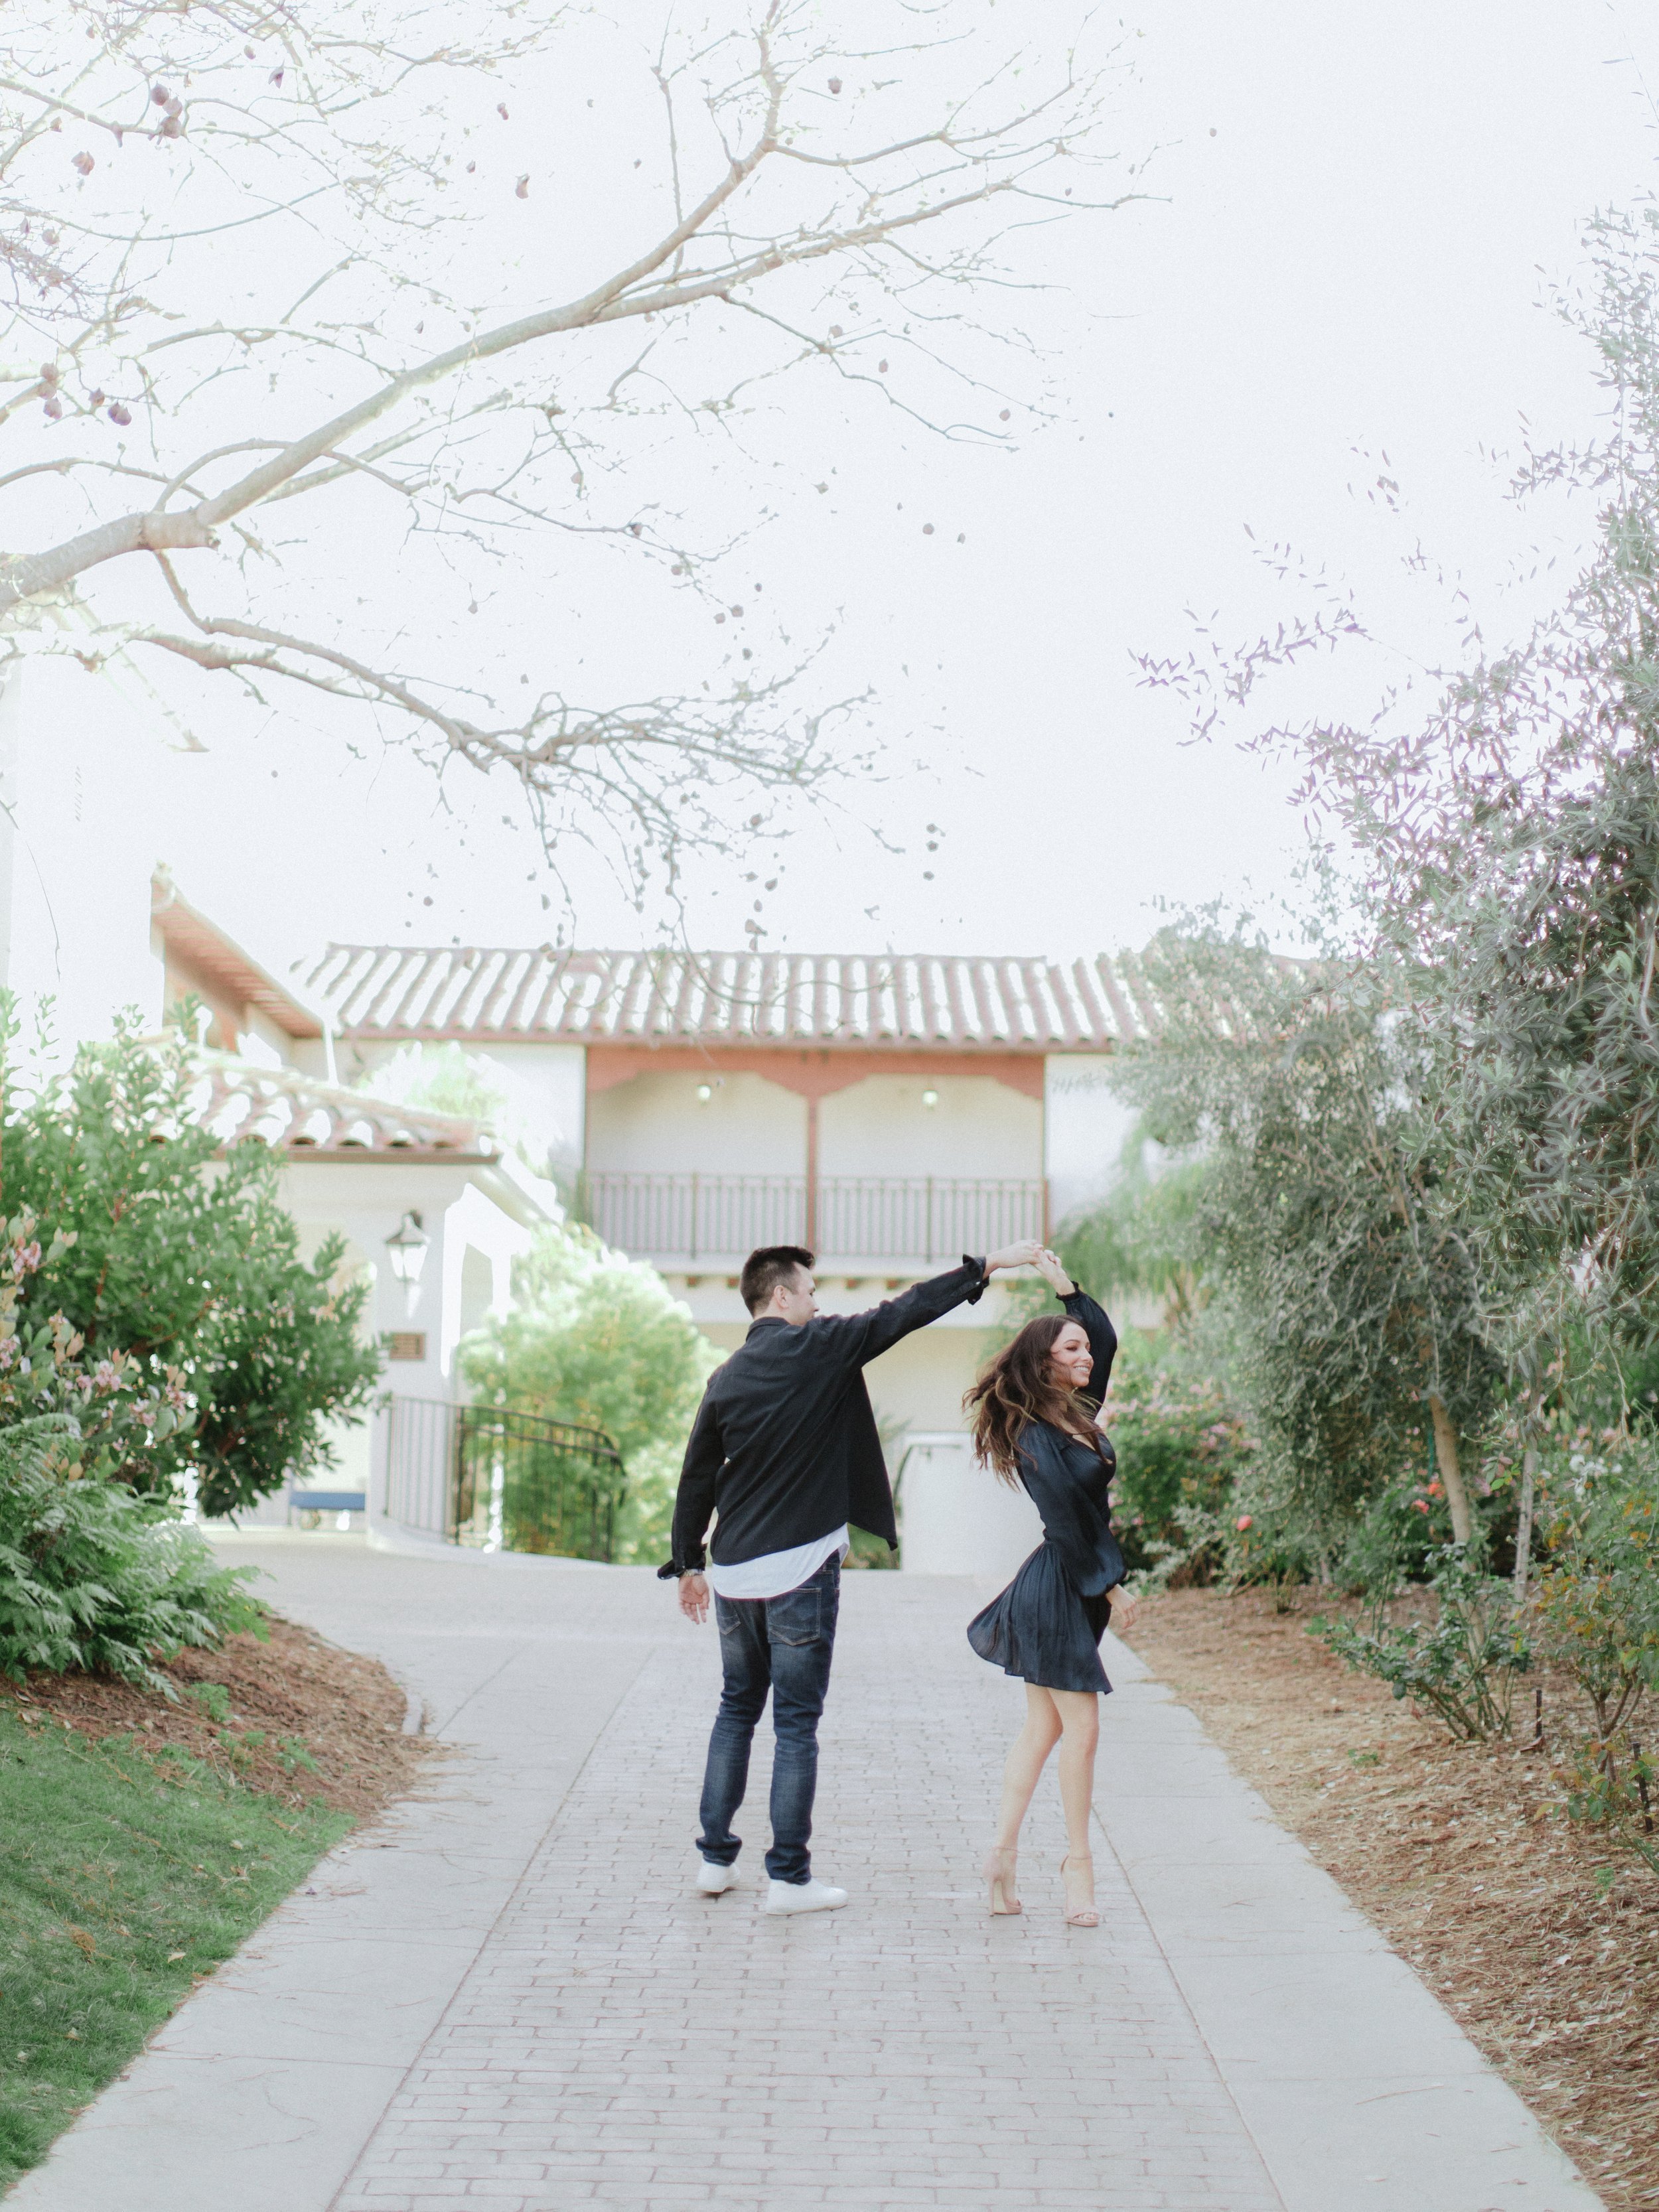 www.santabarbarawedding.com | Chris J. Evans Photography | Groom to Be Twirling Fiancee in the Park 